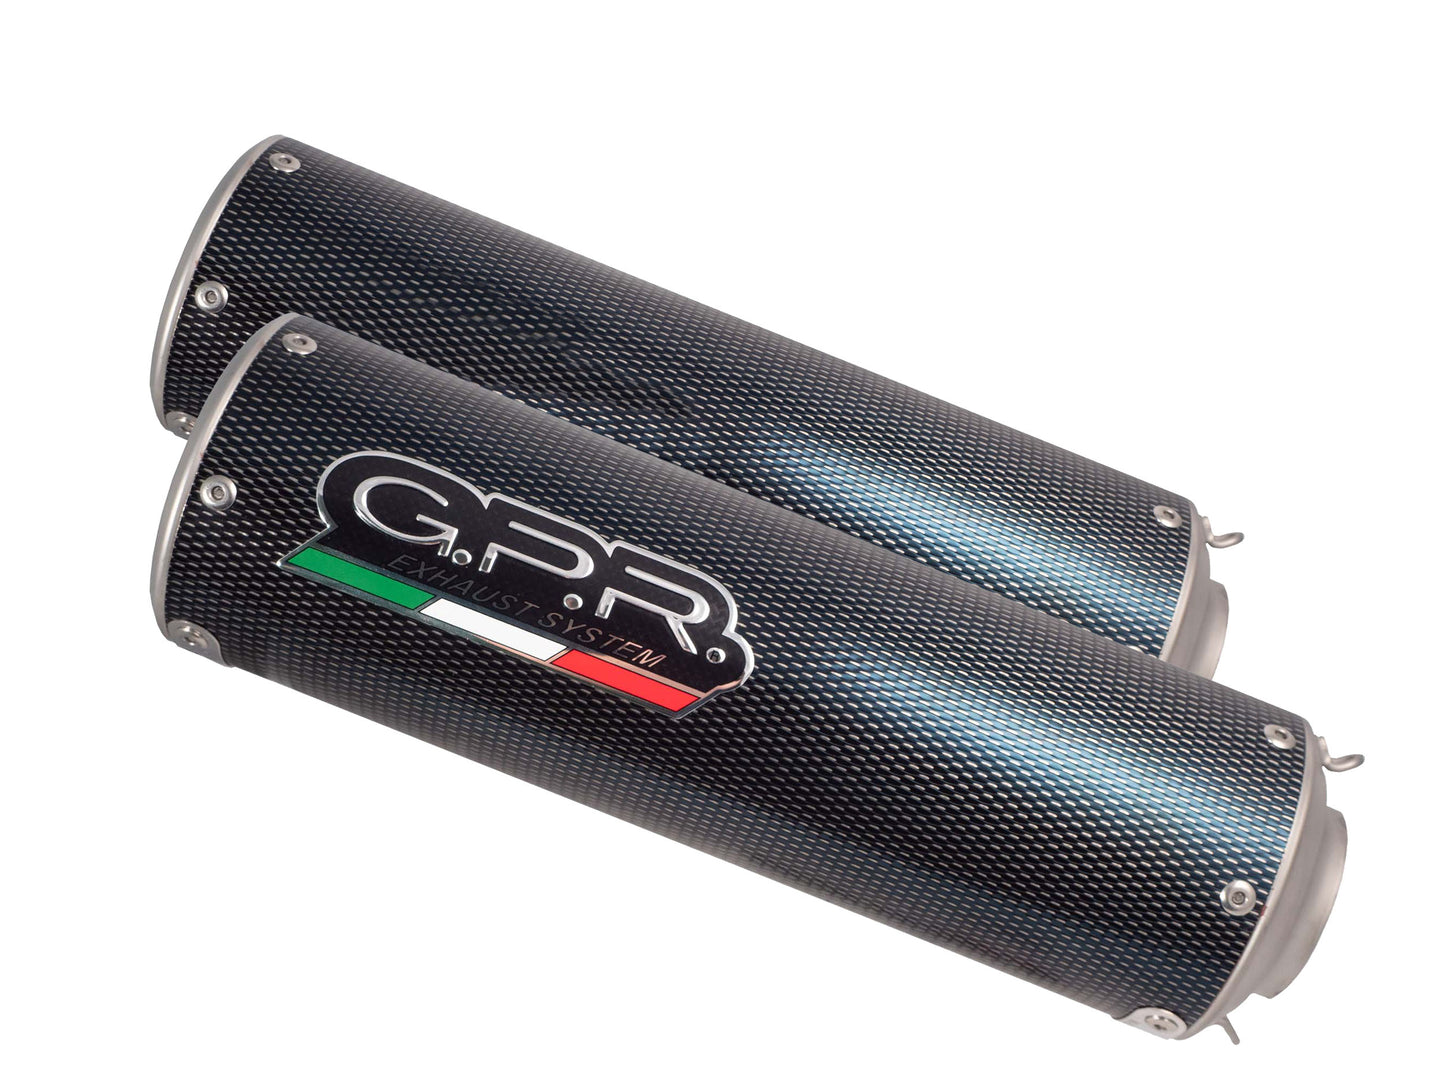 GPR Exhaust System Ducati 749 2003-2007, M3 Poppy , Dual slip-on Including Removable DB Killers and Link Pipes